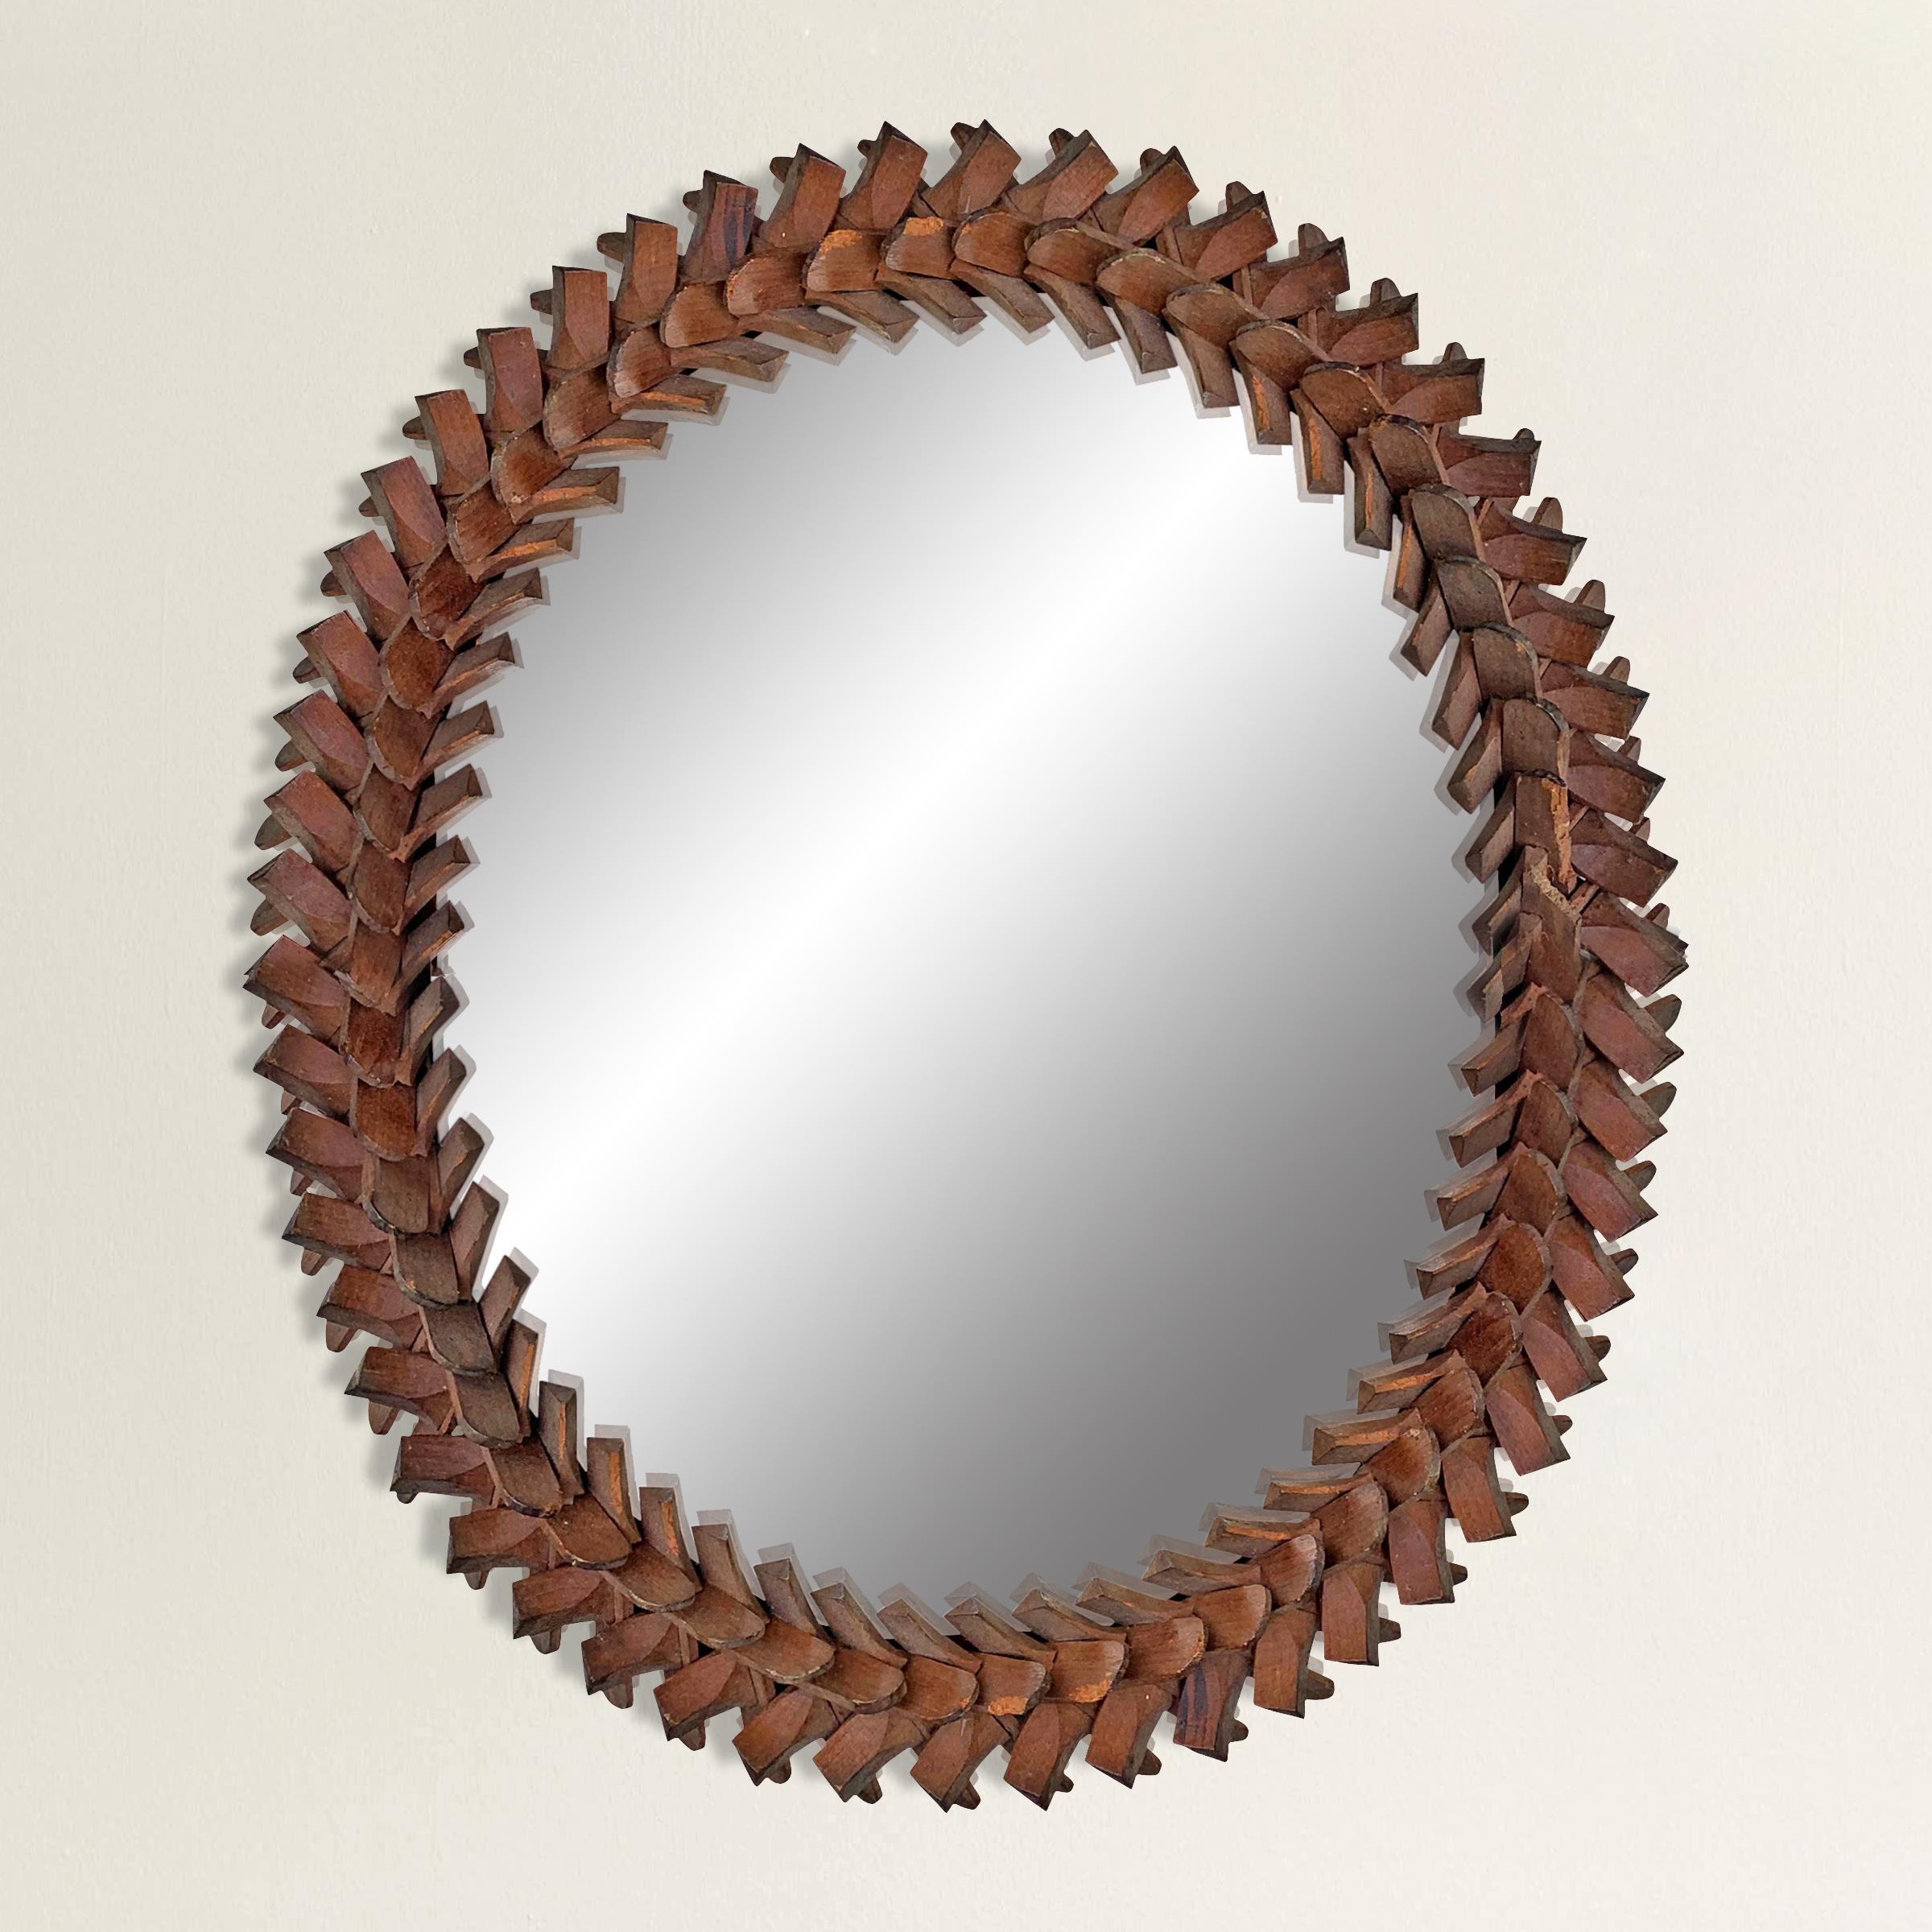 A whimsical 19th century American Folk Art Tramp Art oval framed mirror with a hand carved interlocking puzzle piece frame. Mirror can be hung vertically or horizontally.